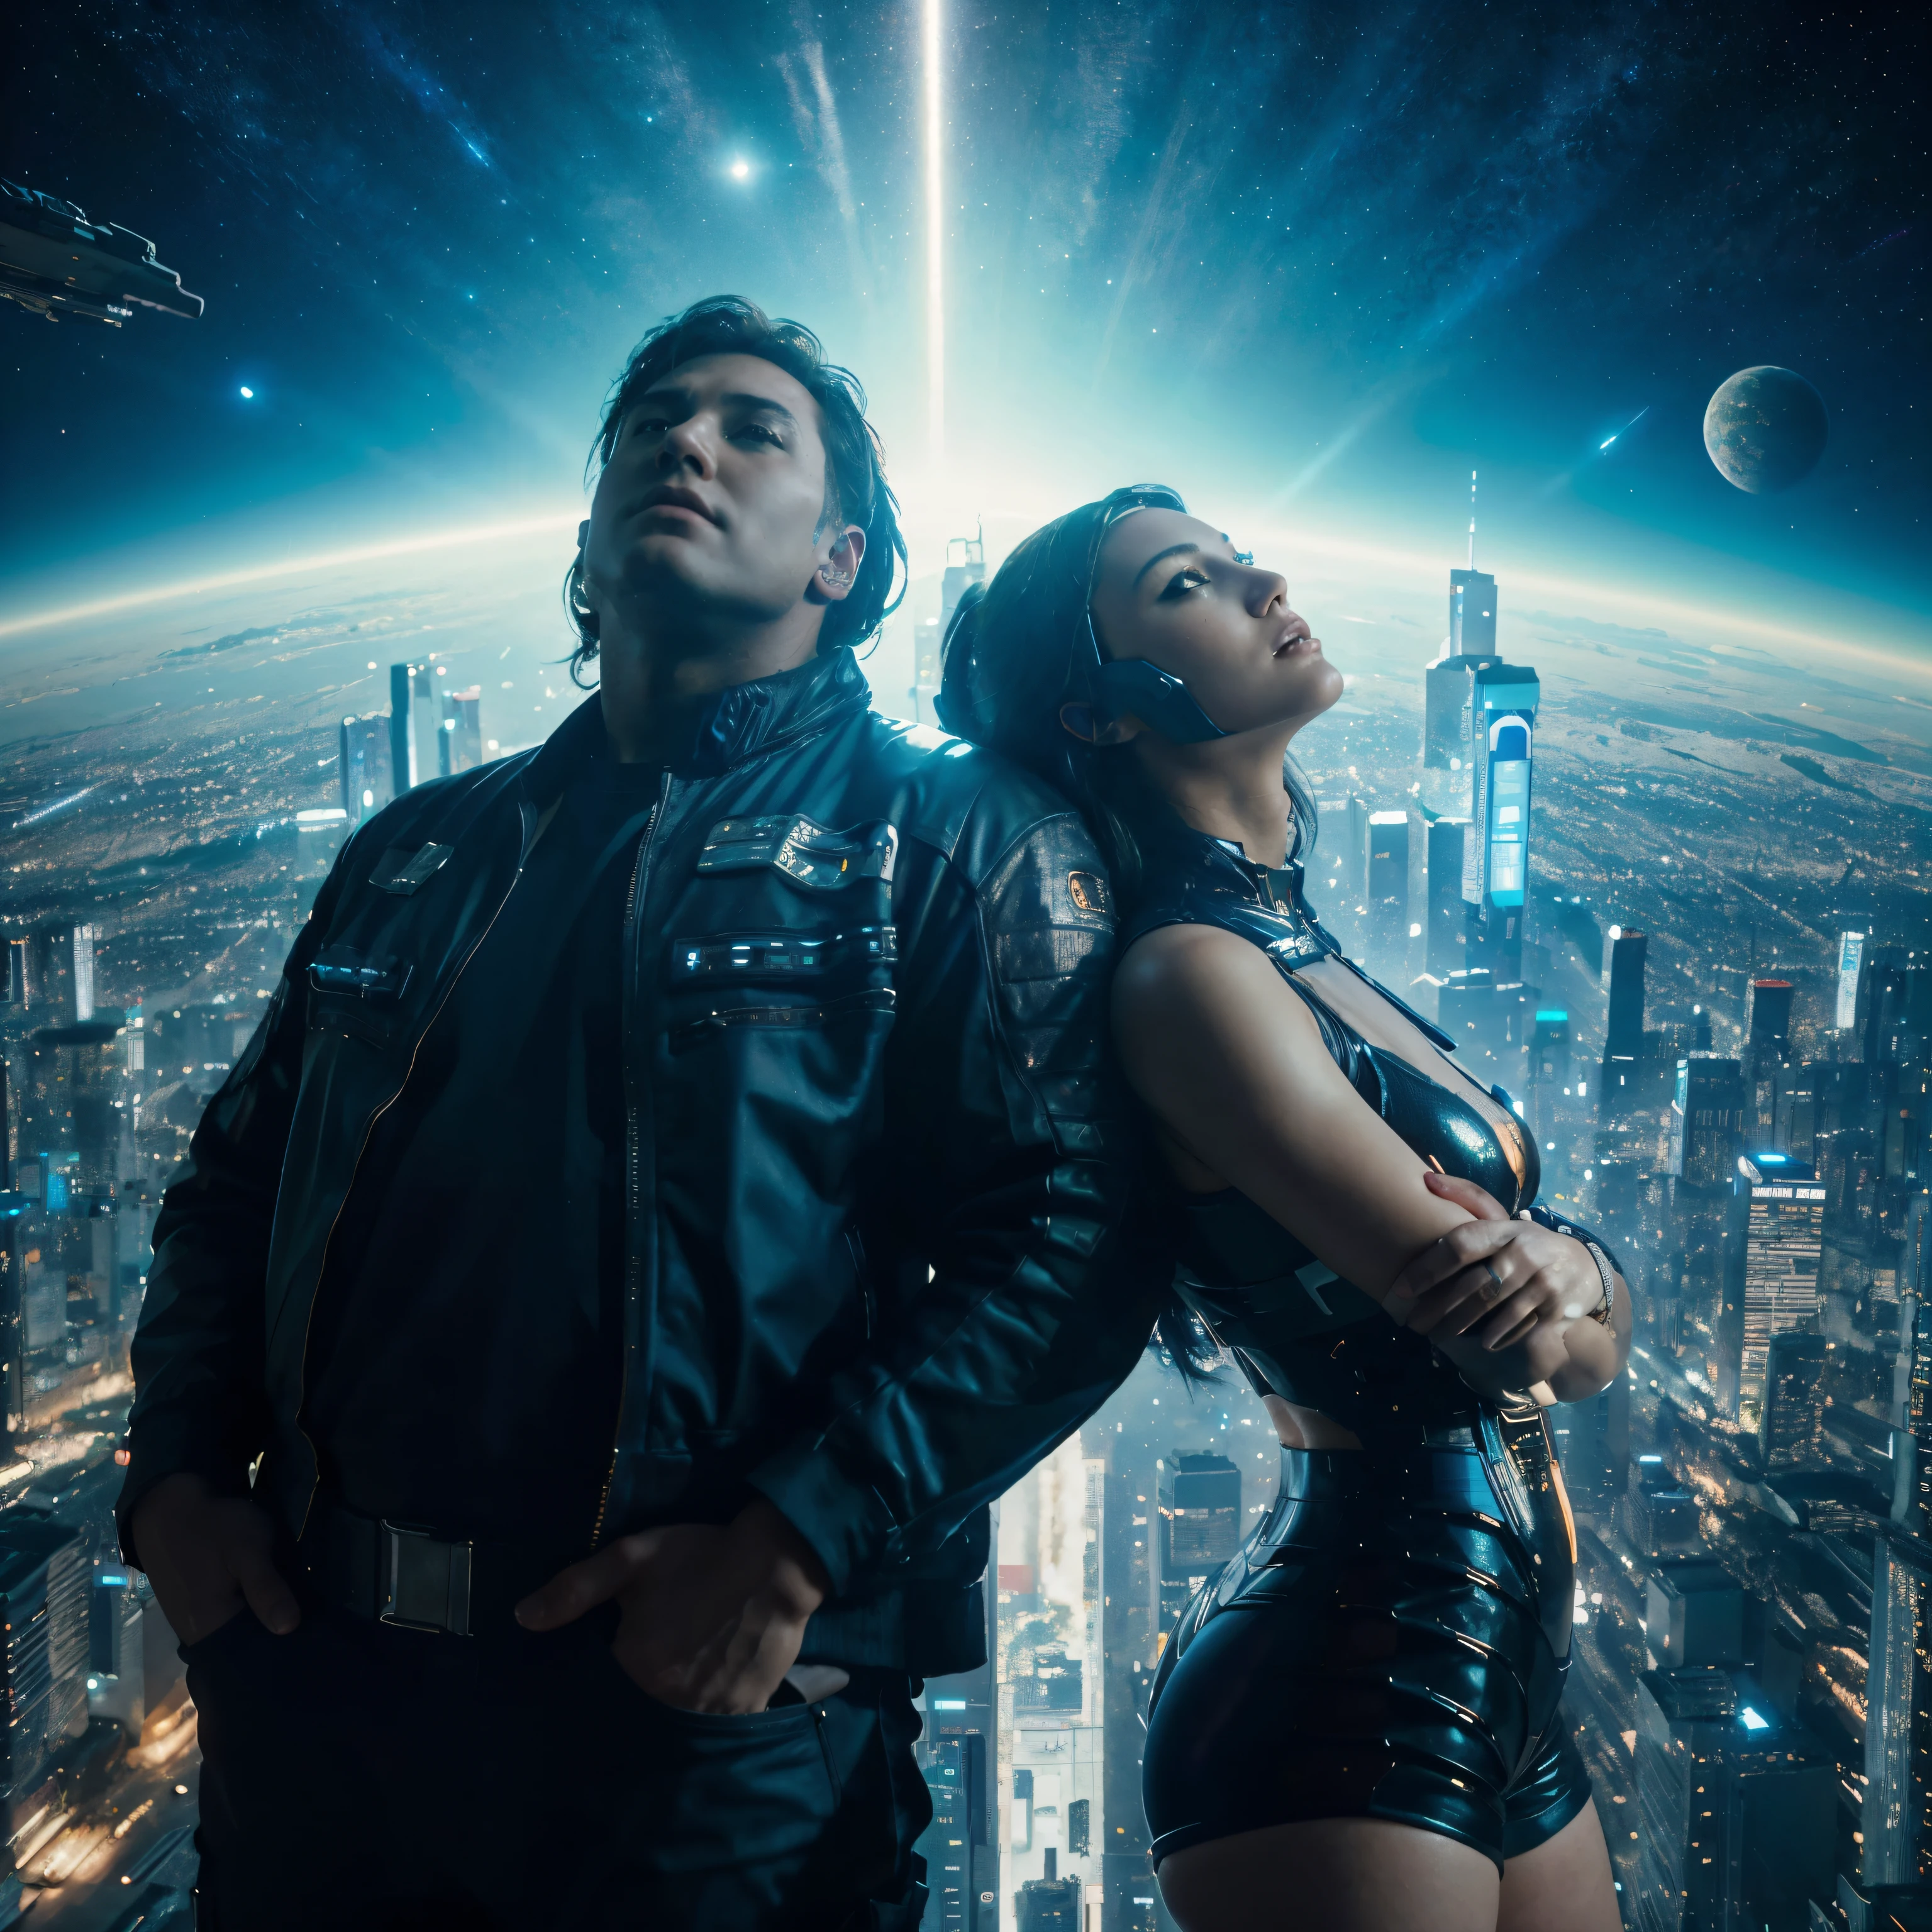 32k, Hyper Realistic, Cinematic scene, best romantic scene, looking up, facing foward, chubby man and slim woman standing lean each other in opposite directions cyberpunk theme, Earth and space as background, beautiful galaxy views, Hyper detailed faces, detailed eyes, detailed lips, detailed fingers, detailed environment, detailed cyberpunk theme